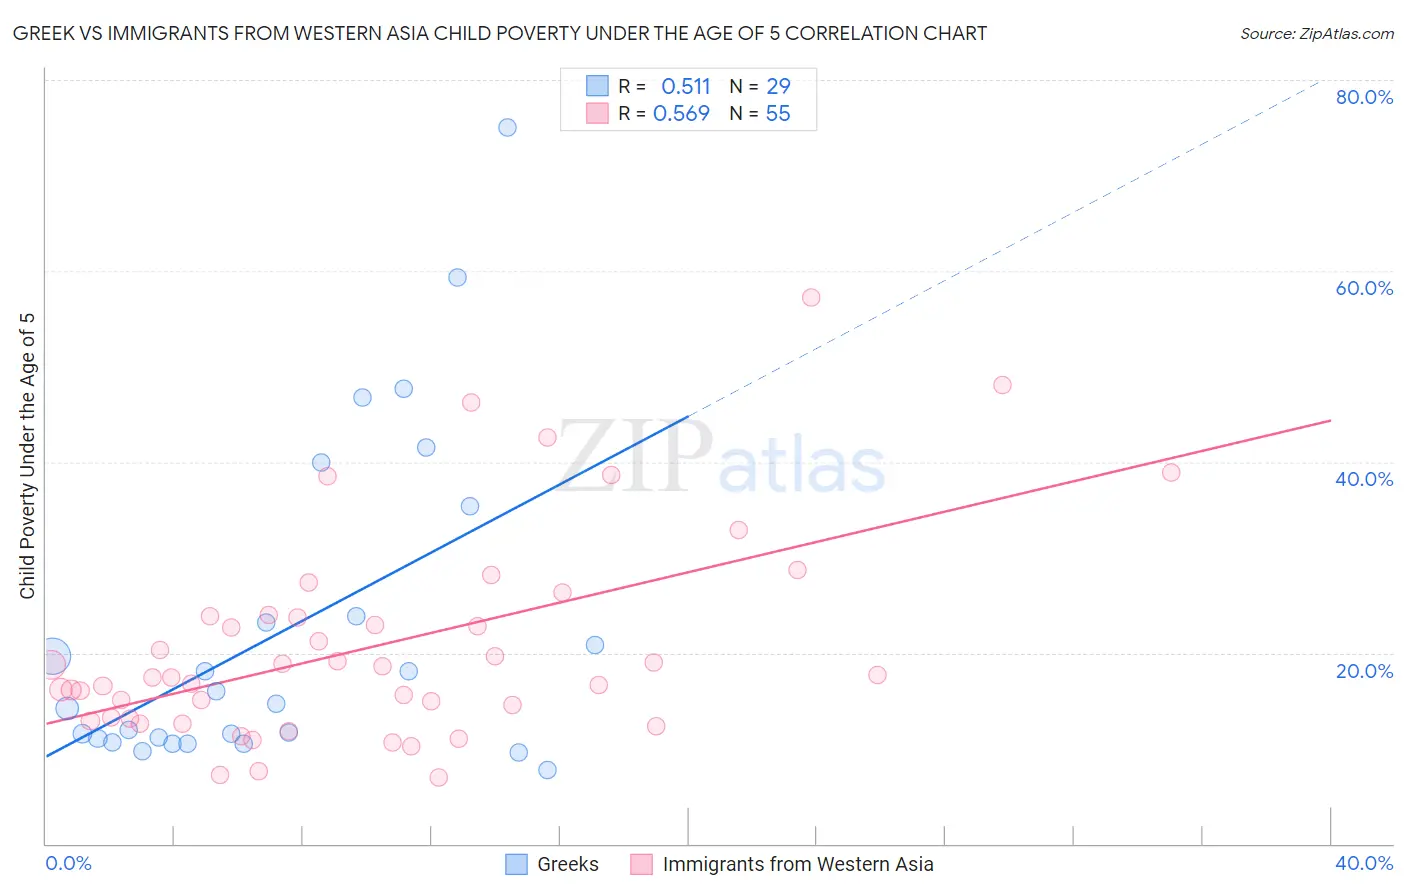 Greek vs Immigrants from Western Asia Child Poverty Under the Age of 5